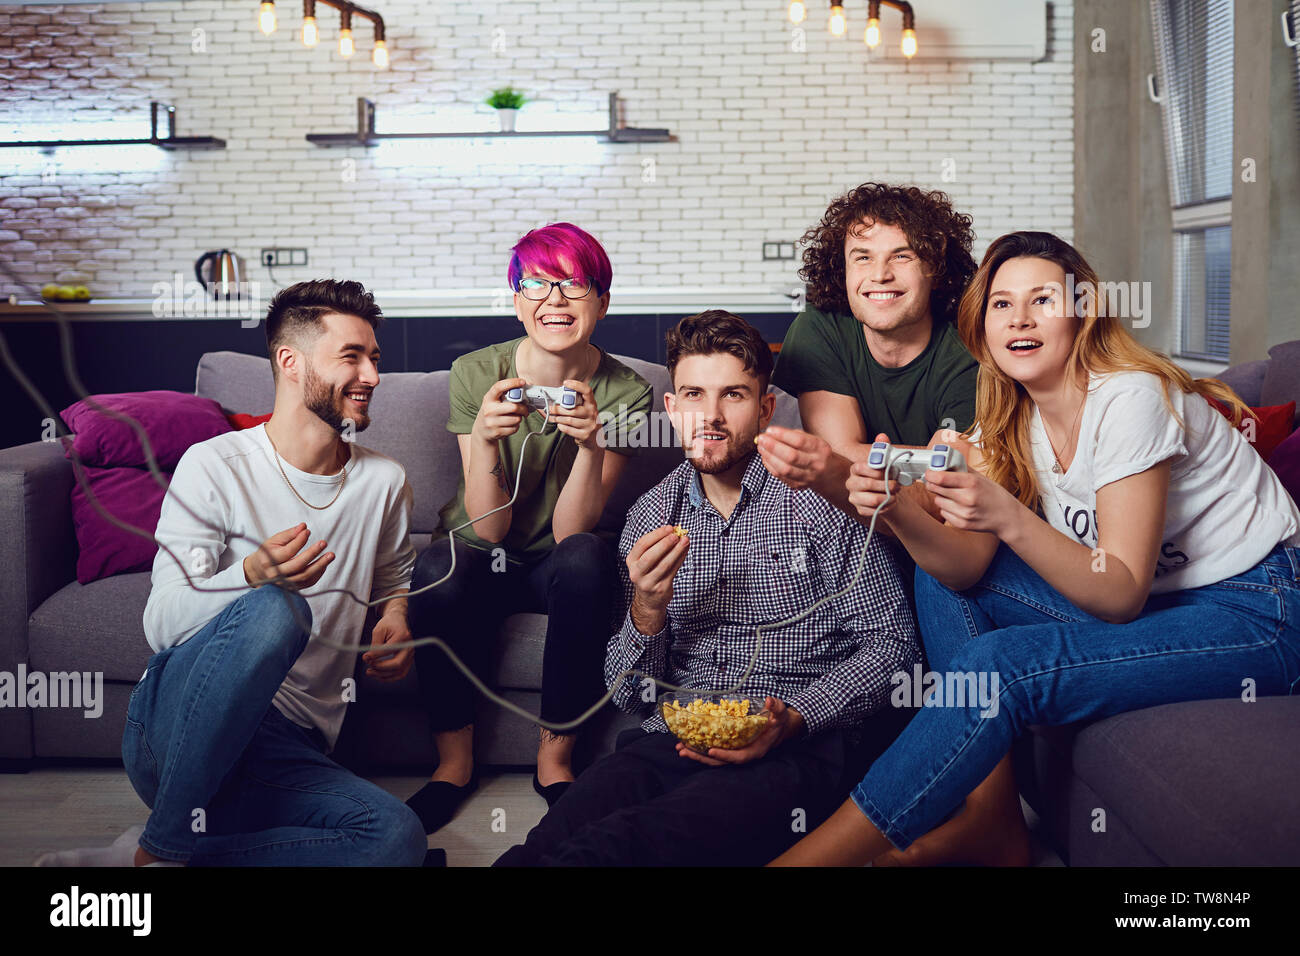 A group of friends playing video games in the room. Stock Photo